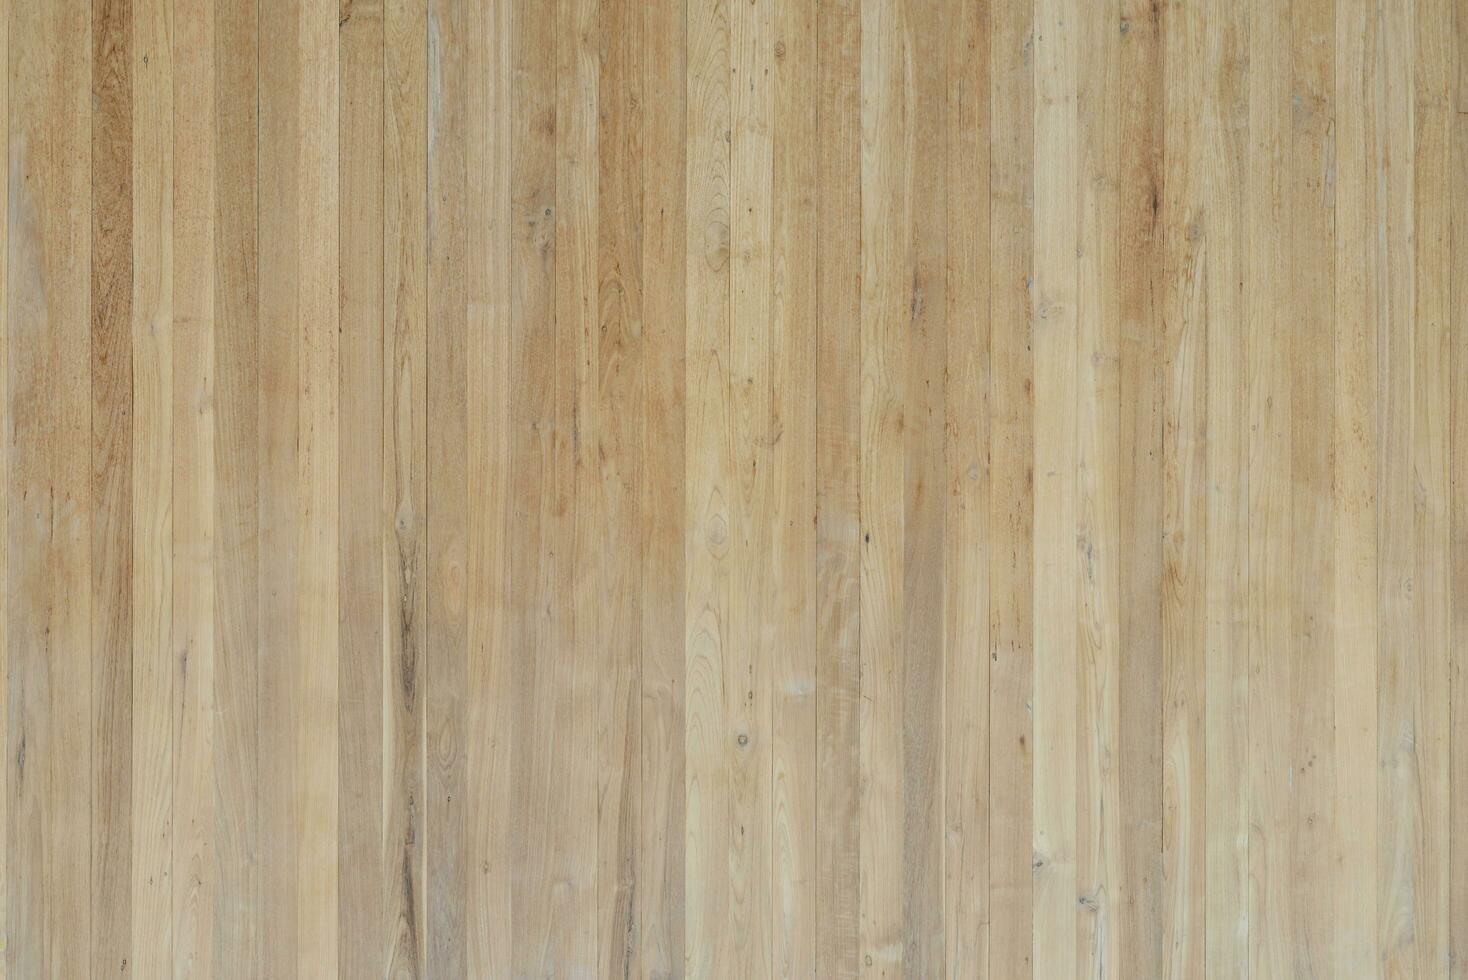 Wood planks use for floor, wall or background photo